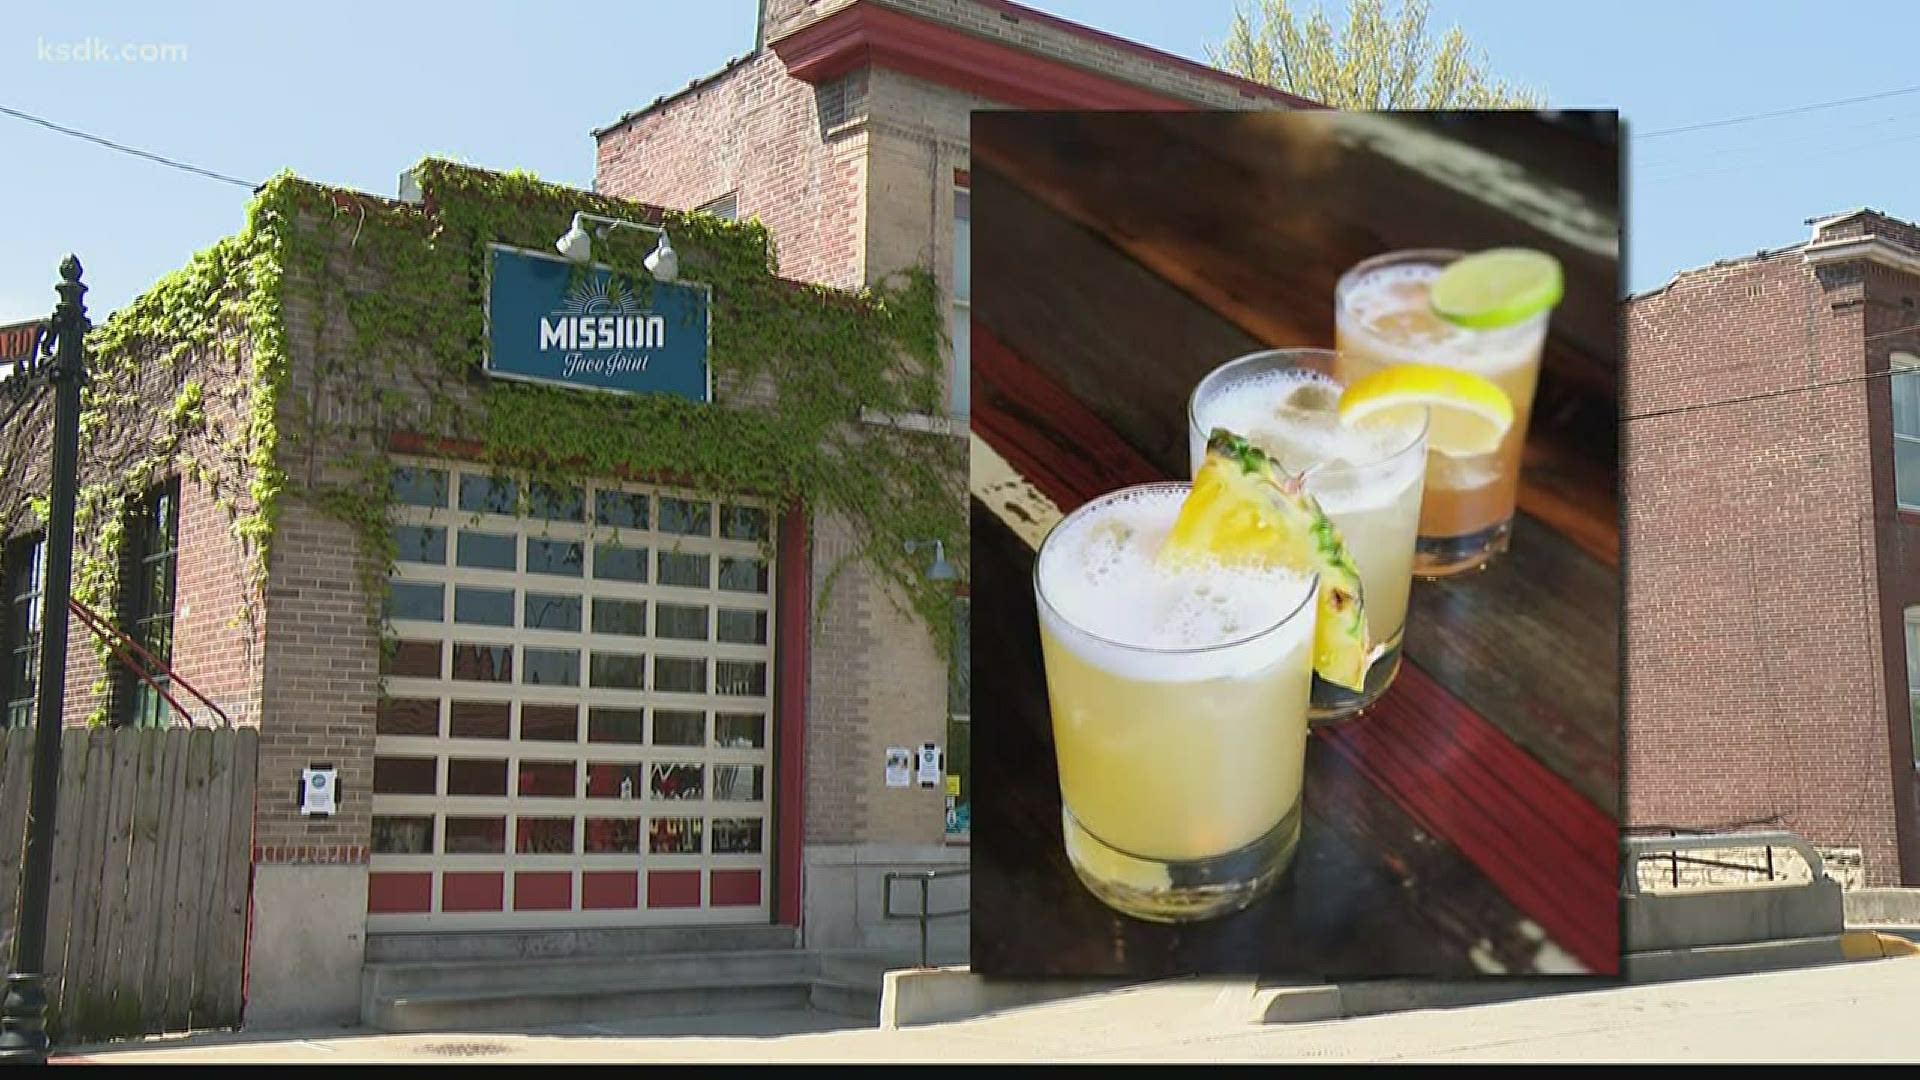 Missouri restaurants are getting some help from the state when it comes to alcohol selling restrictions during the coronavirus pandemic.